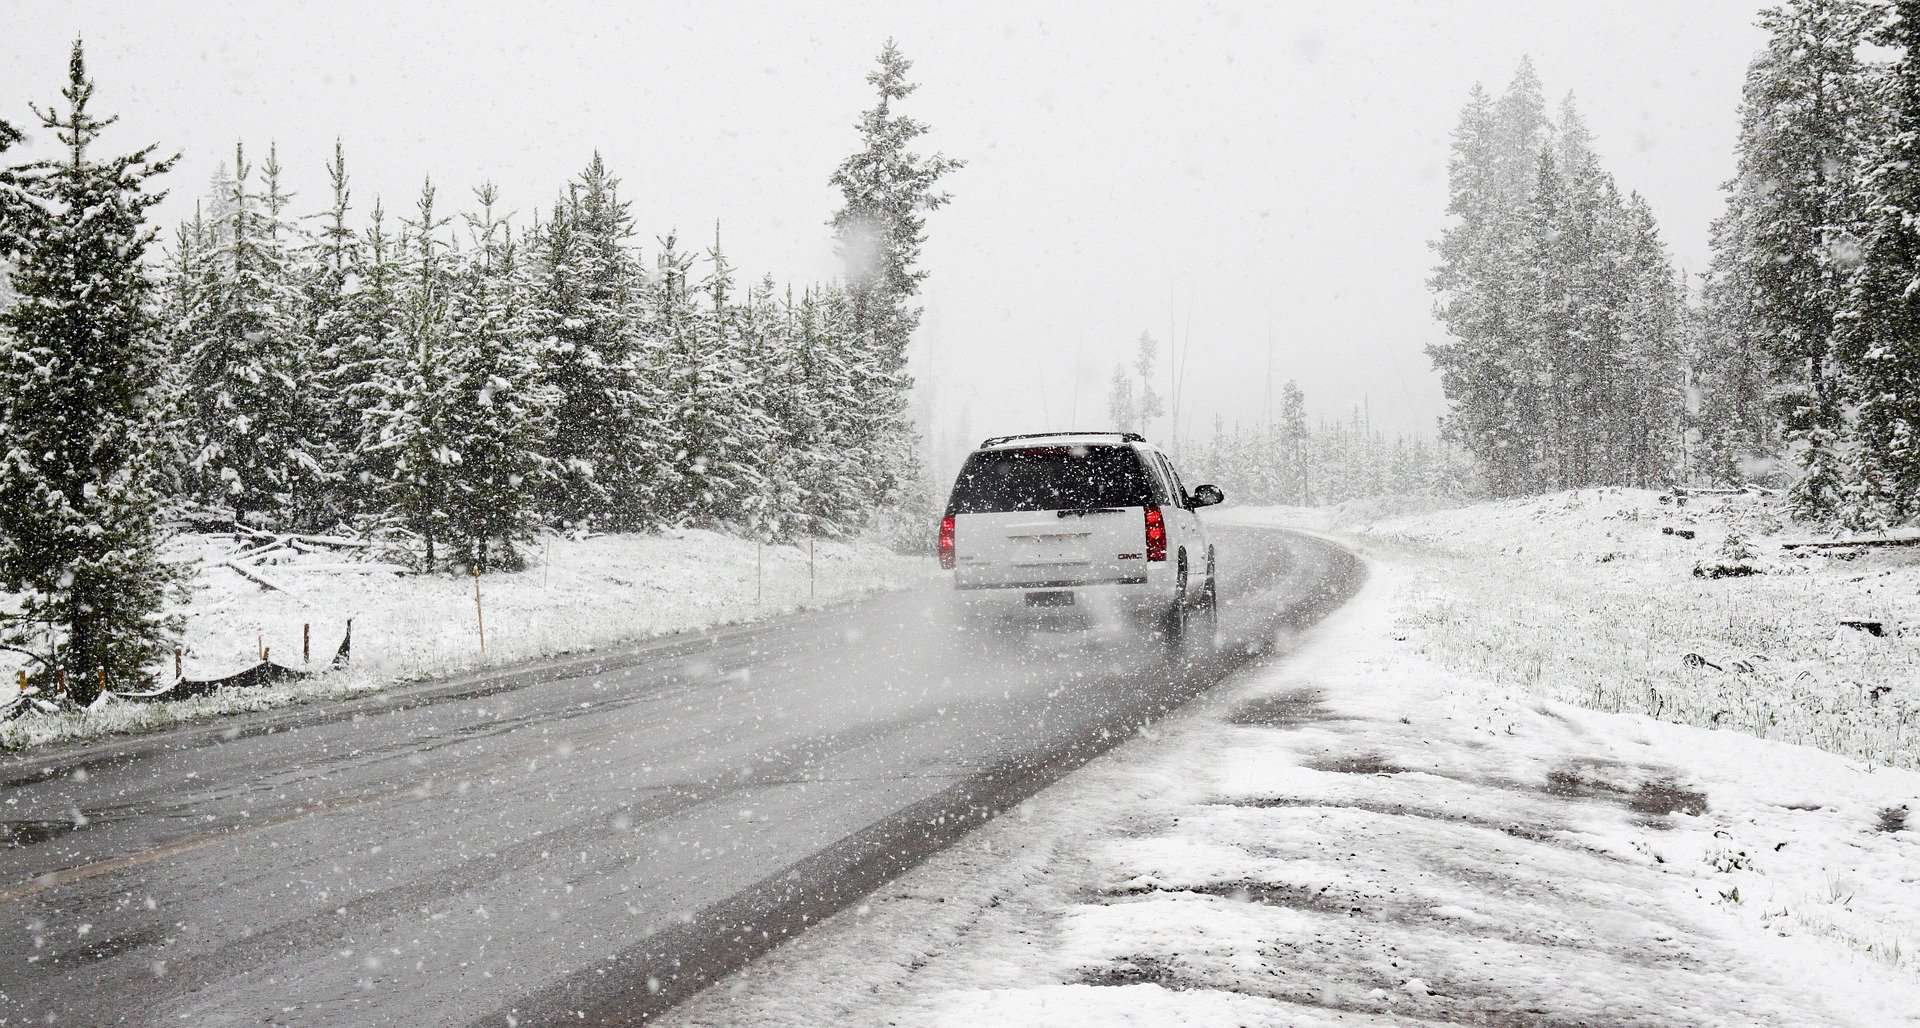 Stay Safe on the Road: How to Drive Confidently in Inclement Weather - Driving Techniques for Snowy Conditions